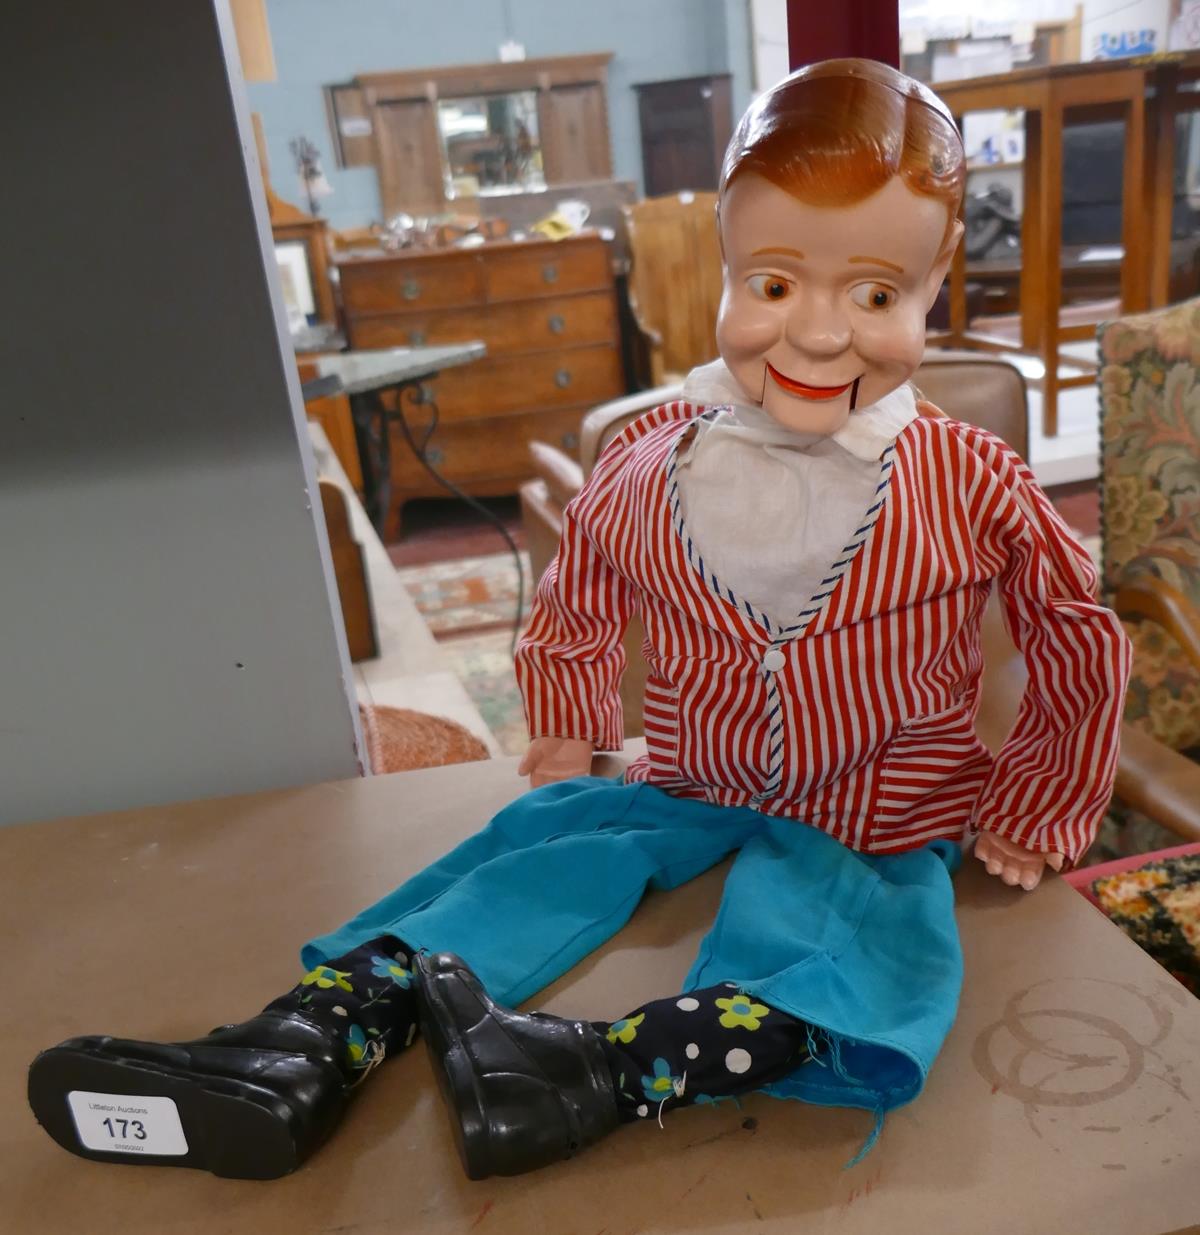 Vintage ventriloquist dummy - Jolly Jim - As seen on Tuesday evenings Bidding Rooms on the BBC